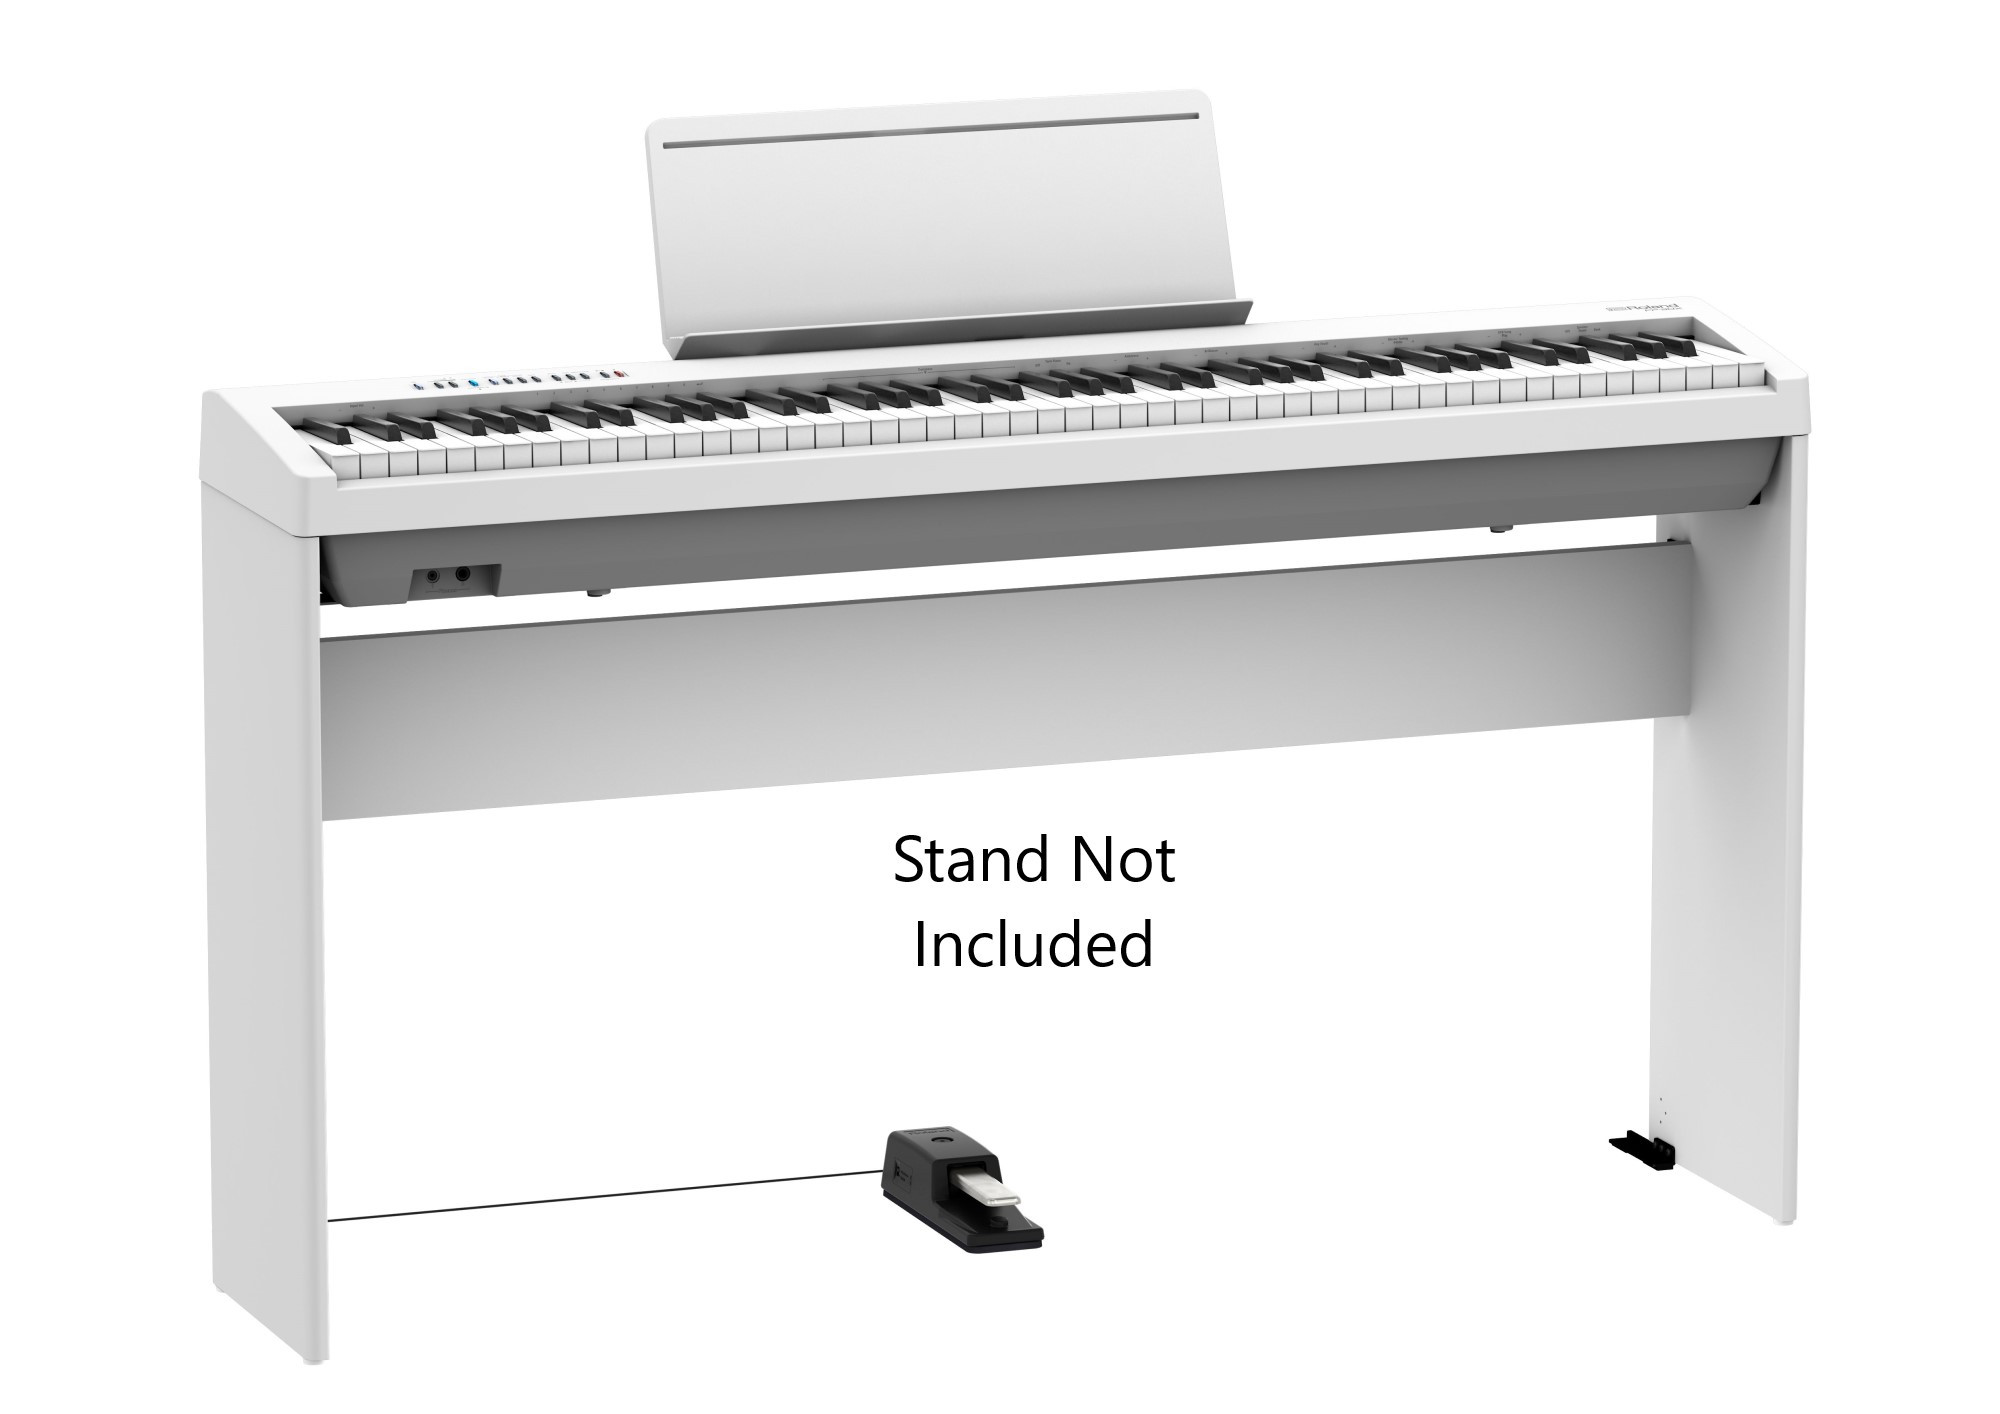  Roland FP-30X Digital Piano with Built-in Powerful